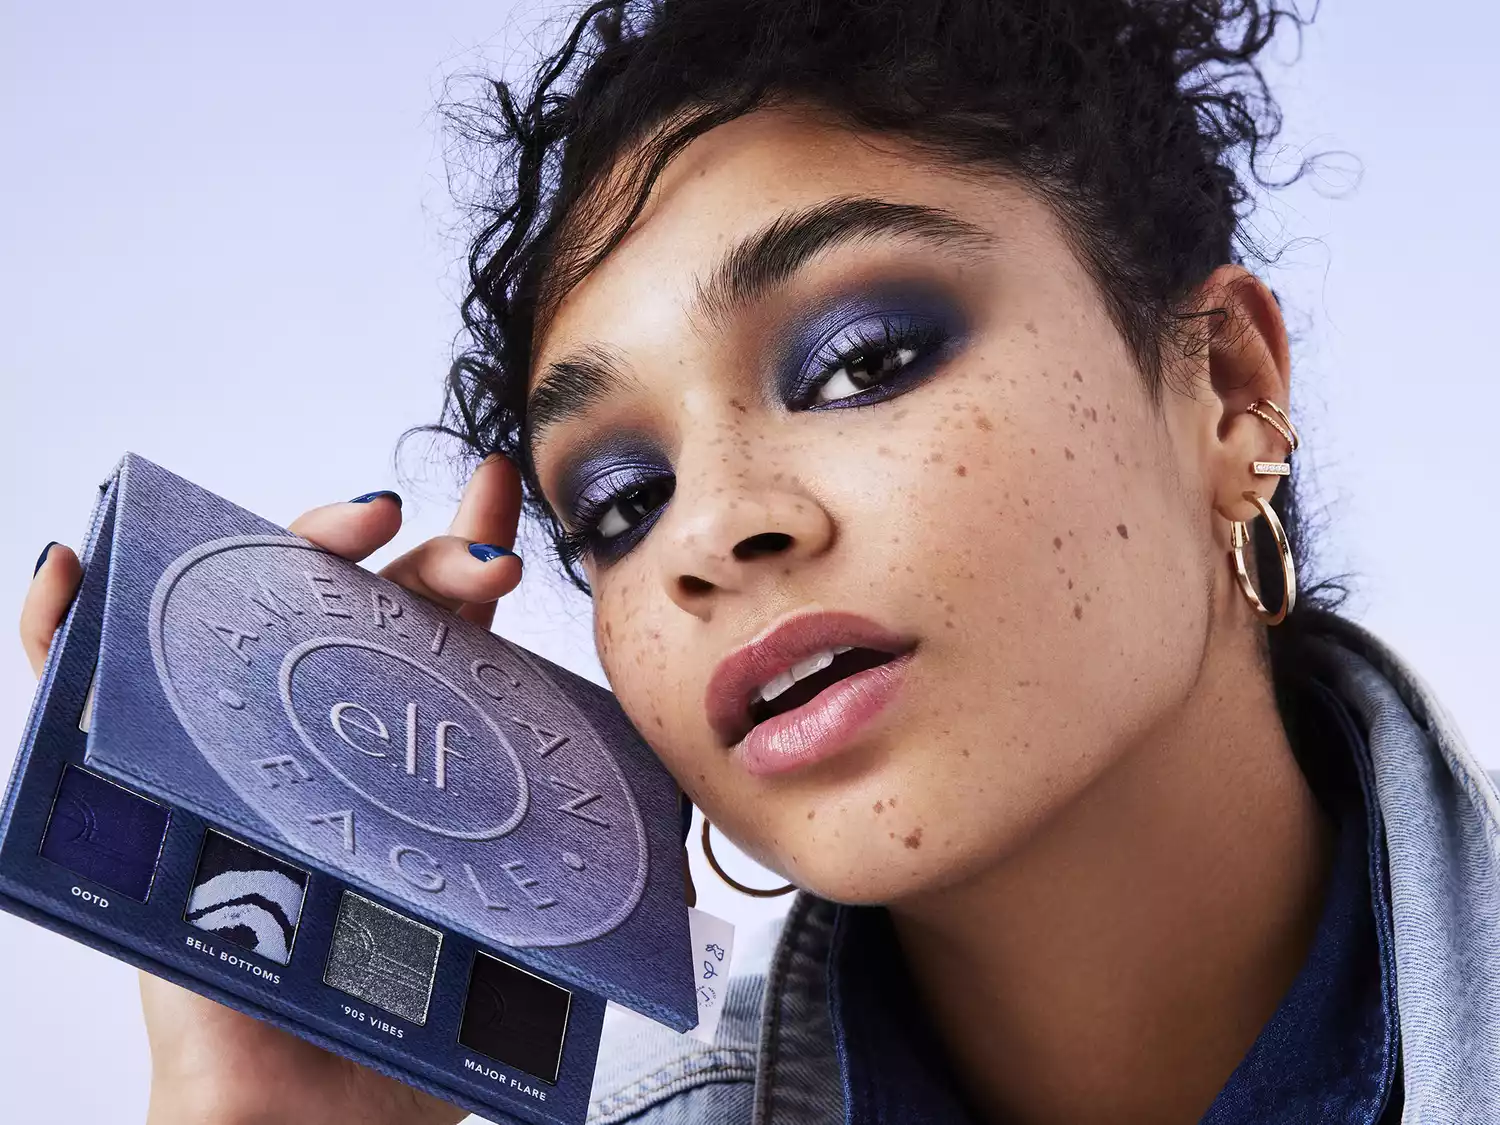 A model wearing blue eyeshadow and holding the AE x e.l.f Eyeshadow Palette